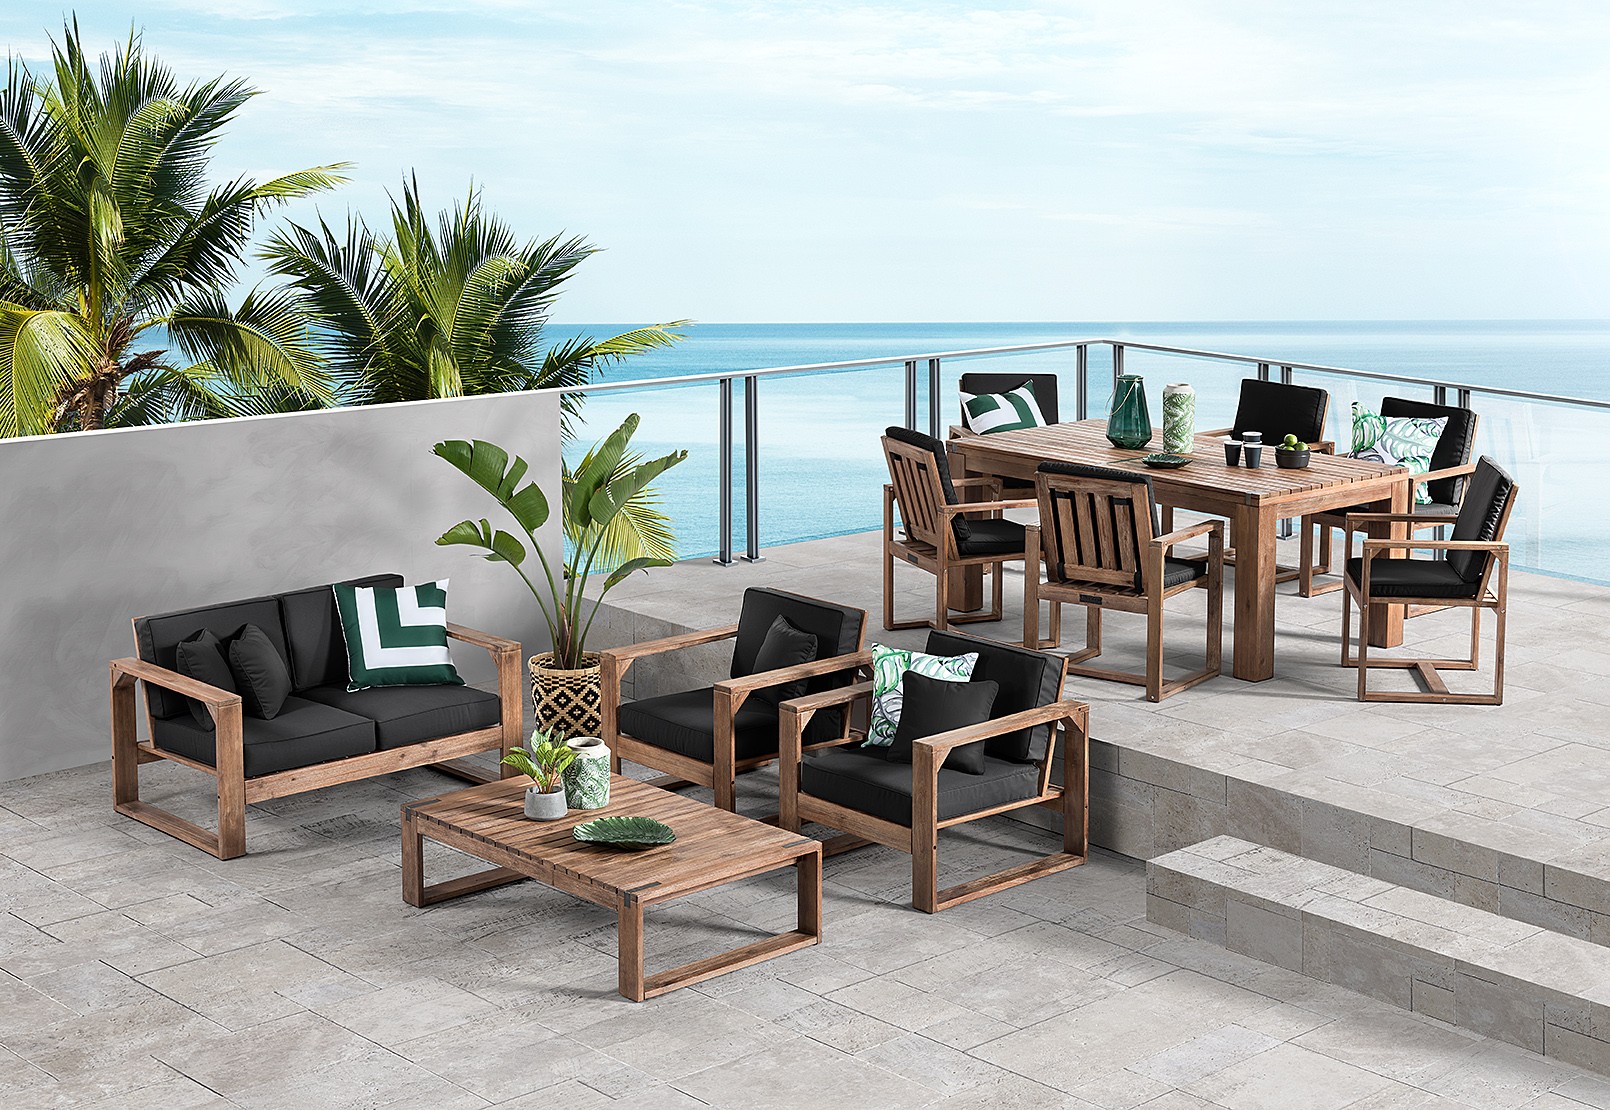 PAGHESY outdoor furniture market